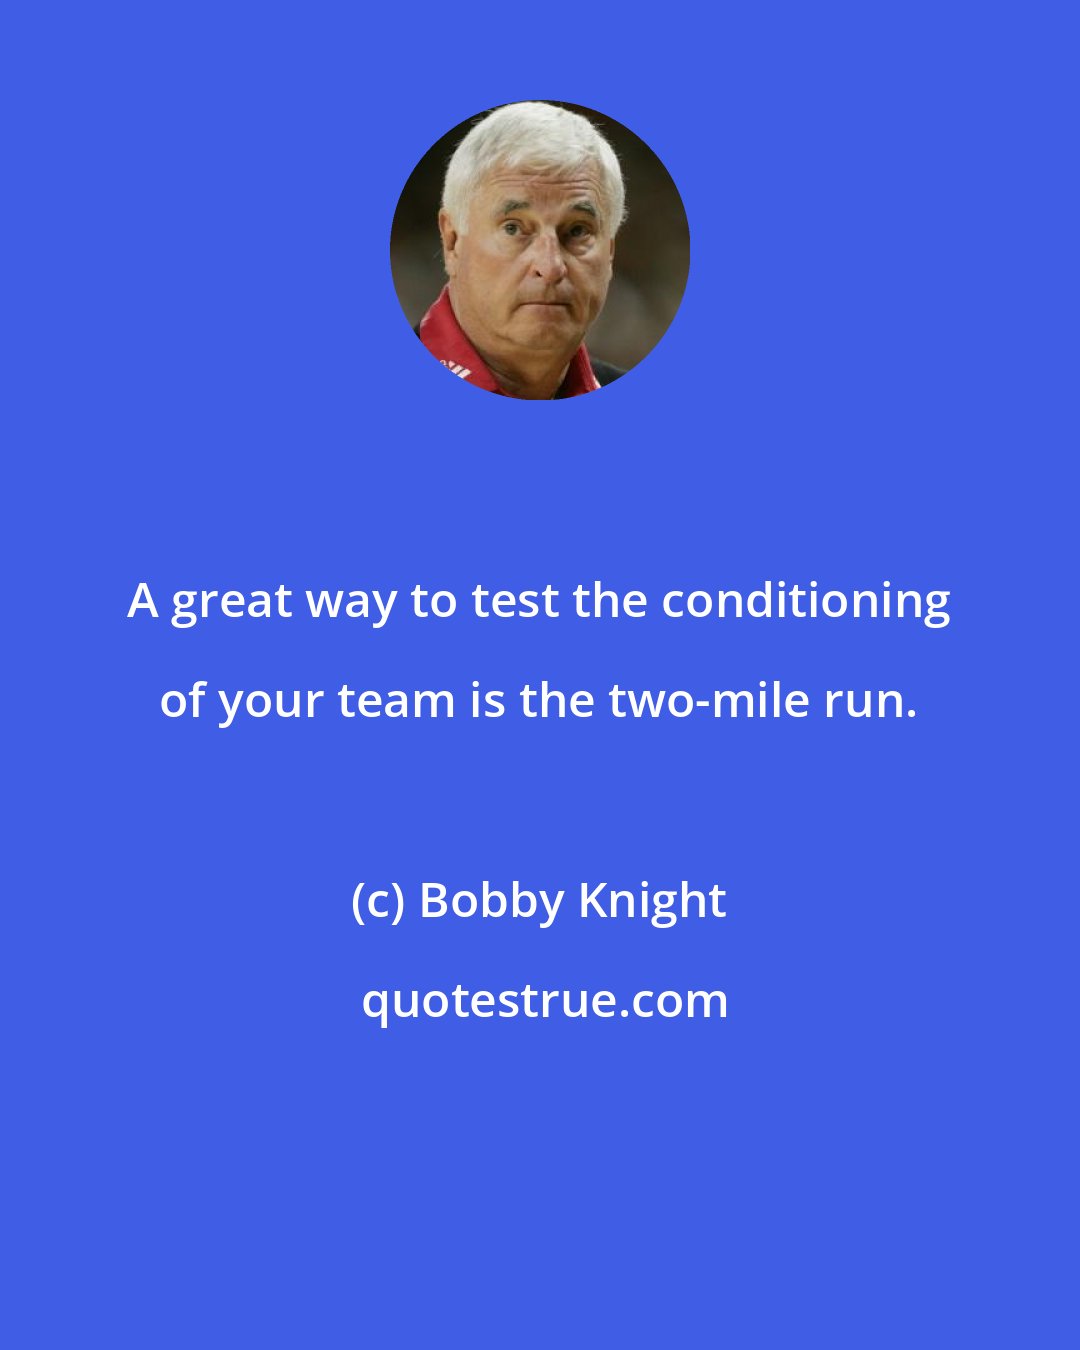 Bobby Knight: A great way to test the conditioning of your team is the two-mile run.